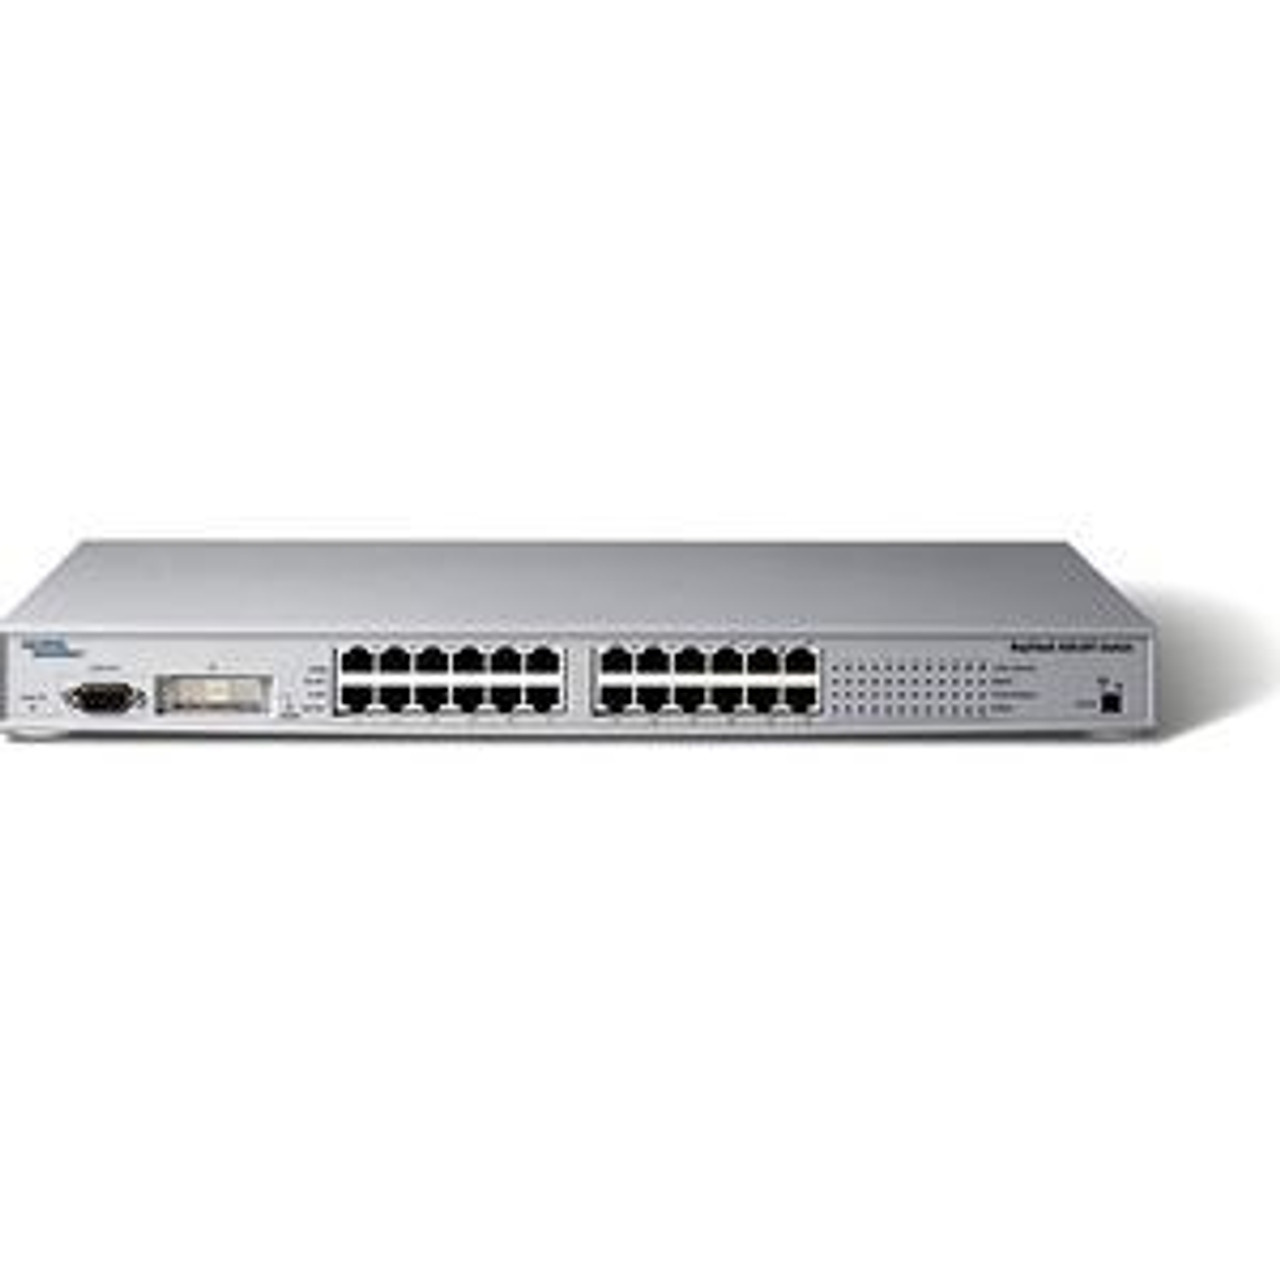 AL2012E39 Nortel Baystack 420-24T 24-Ports 10/100Base-TX and 1 GBIC Fast Ethernet Slot Switch (Refurbished)